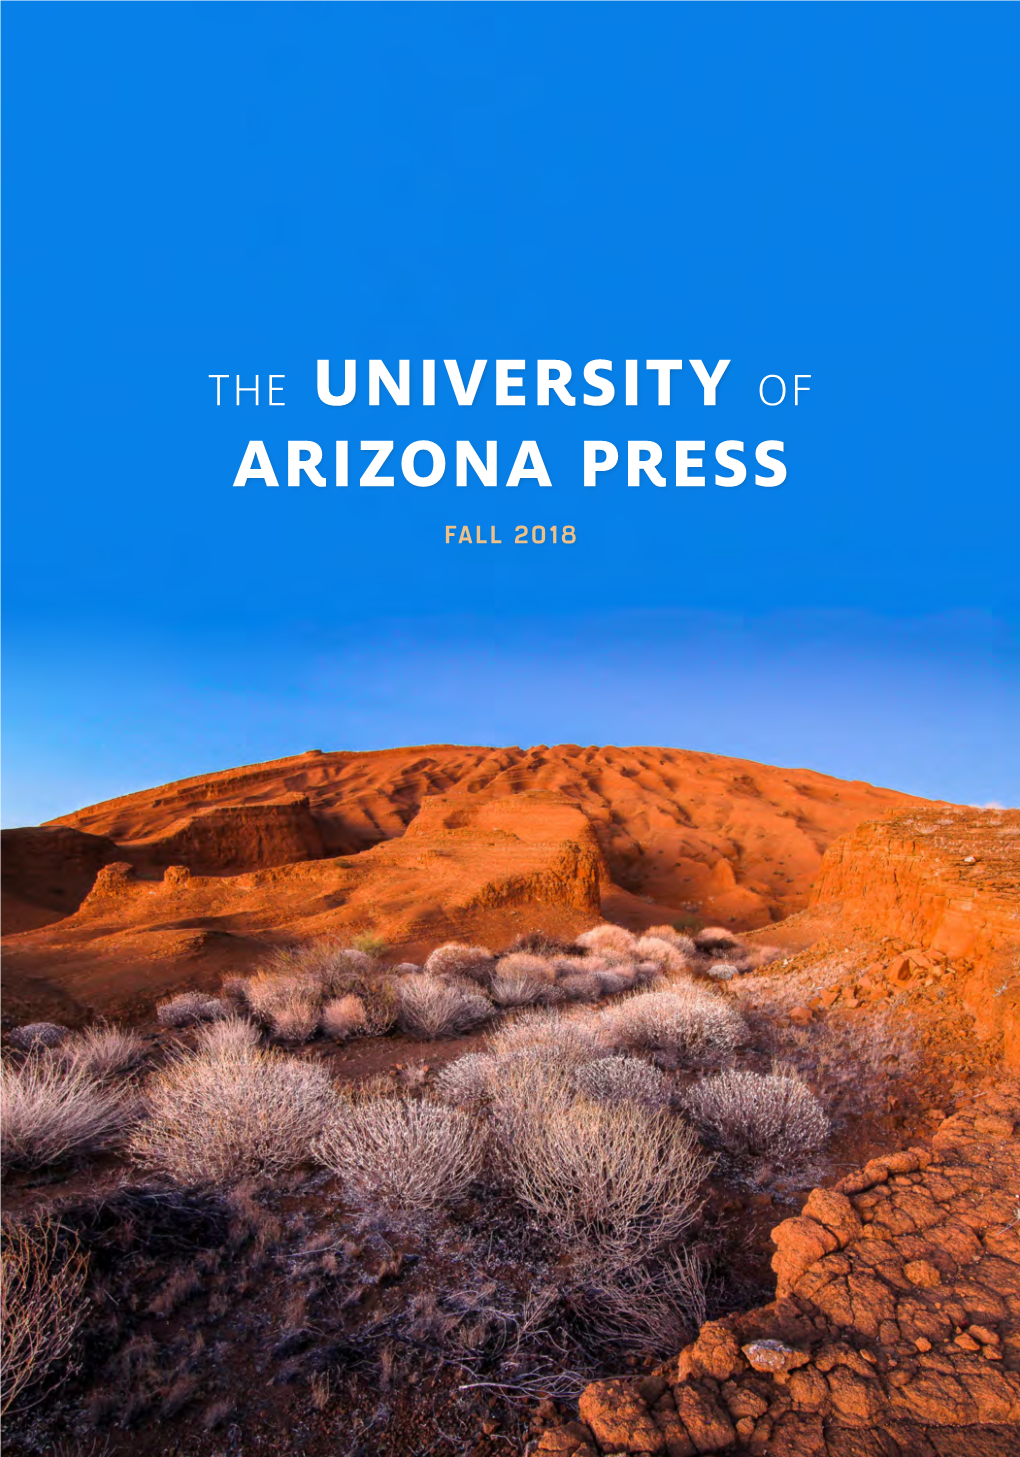 THE UNIVERSITY of ARIZONA PRESS FALL 2018 the University of Arizona Press Is the Premier Publisher of Academic, Regional, and Literary Works in the State of Arizona